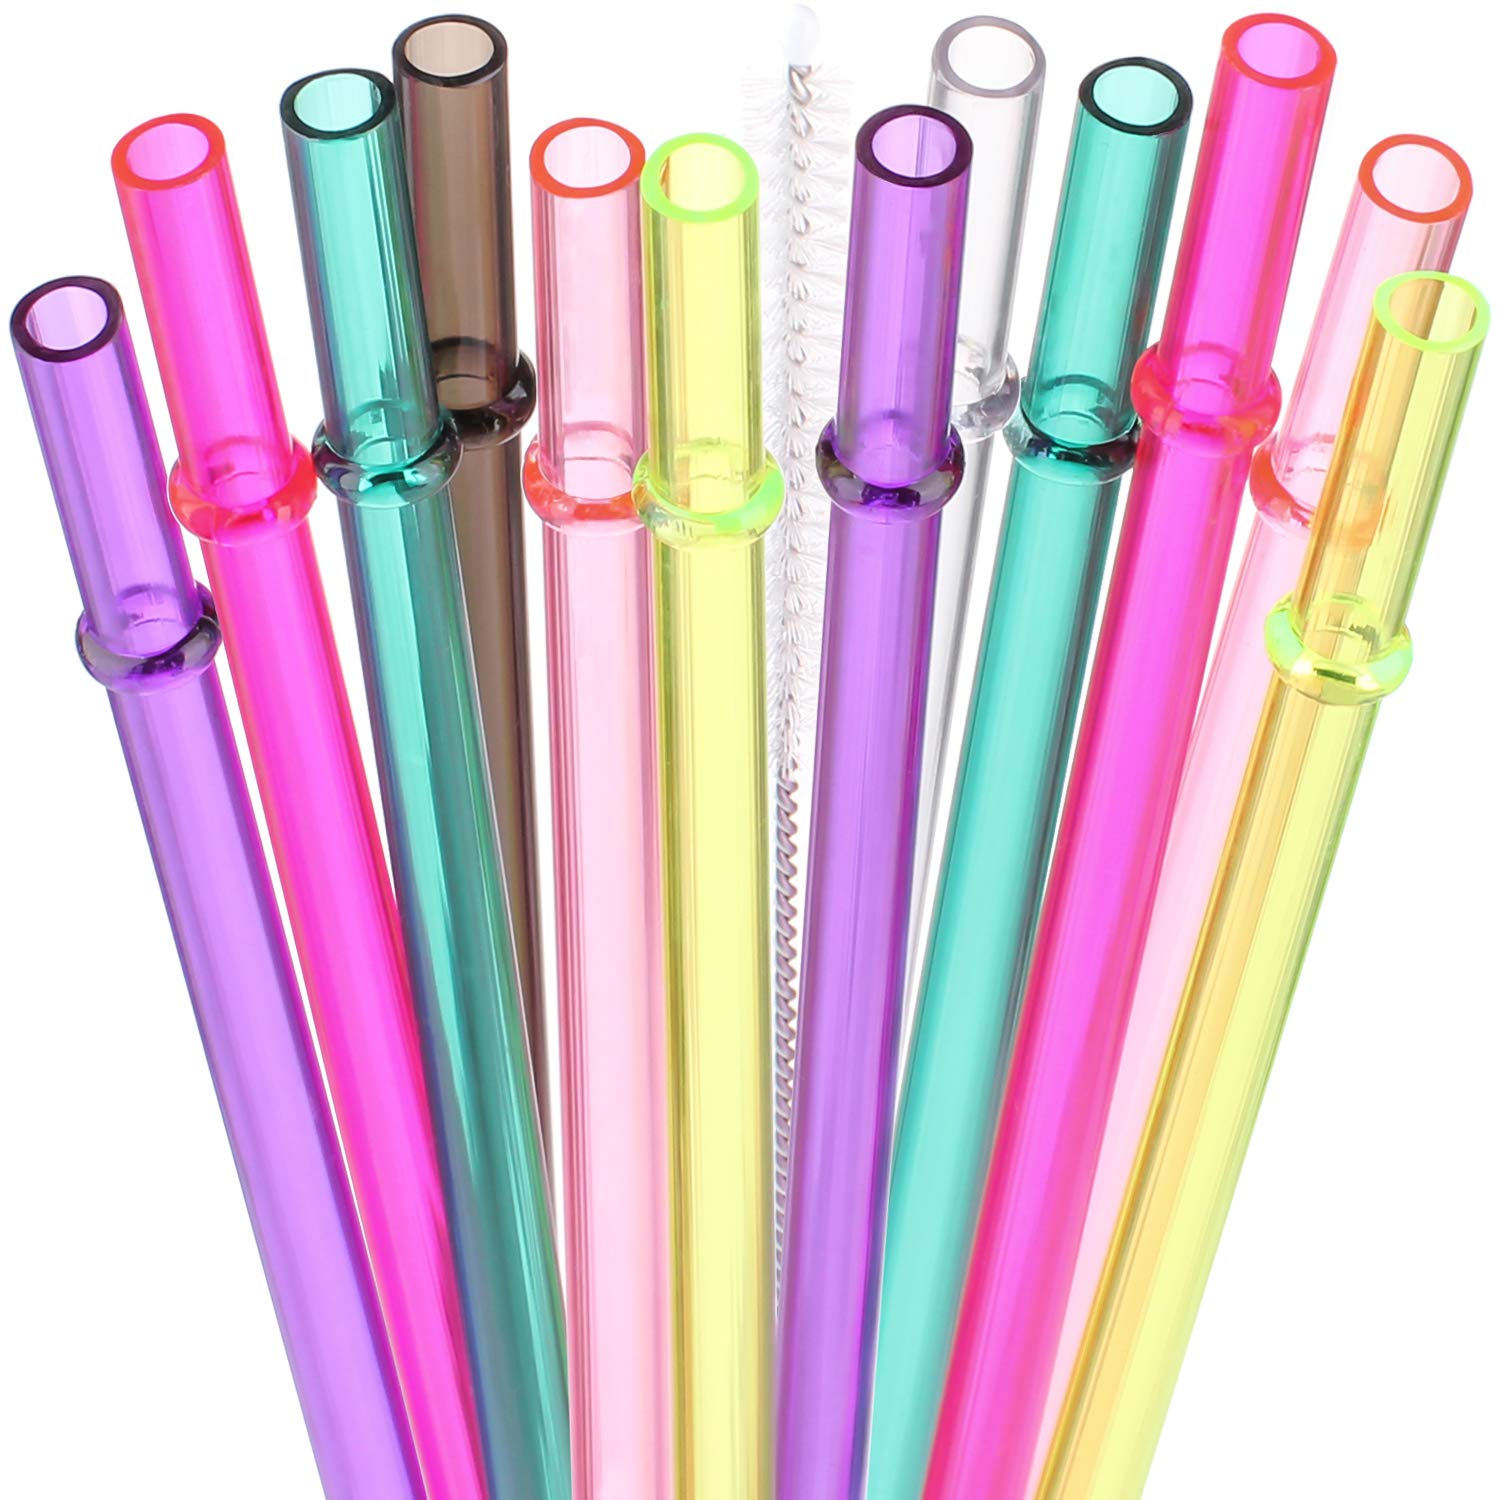 PLASTIC DRINKING STRAWS Reusable Clear Hard Cleaning Brush Yeti